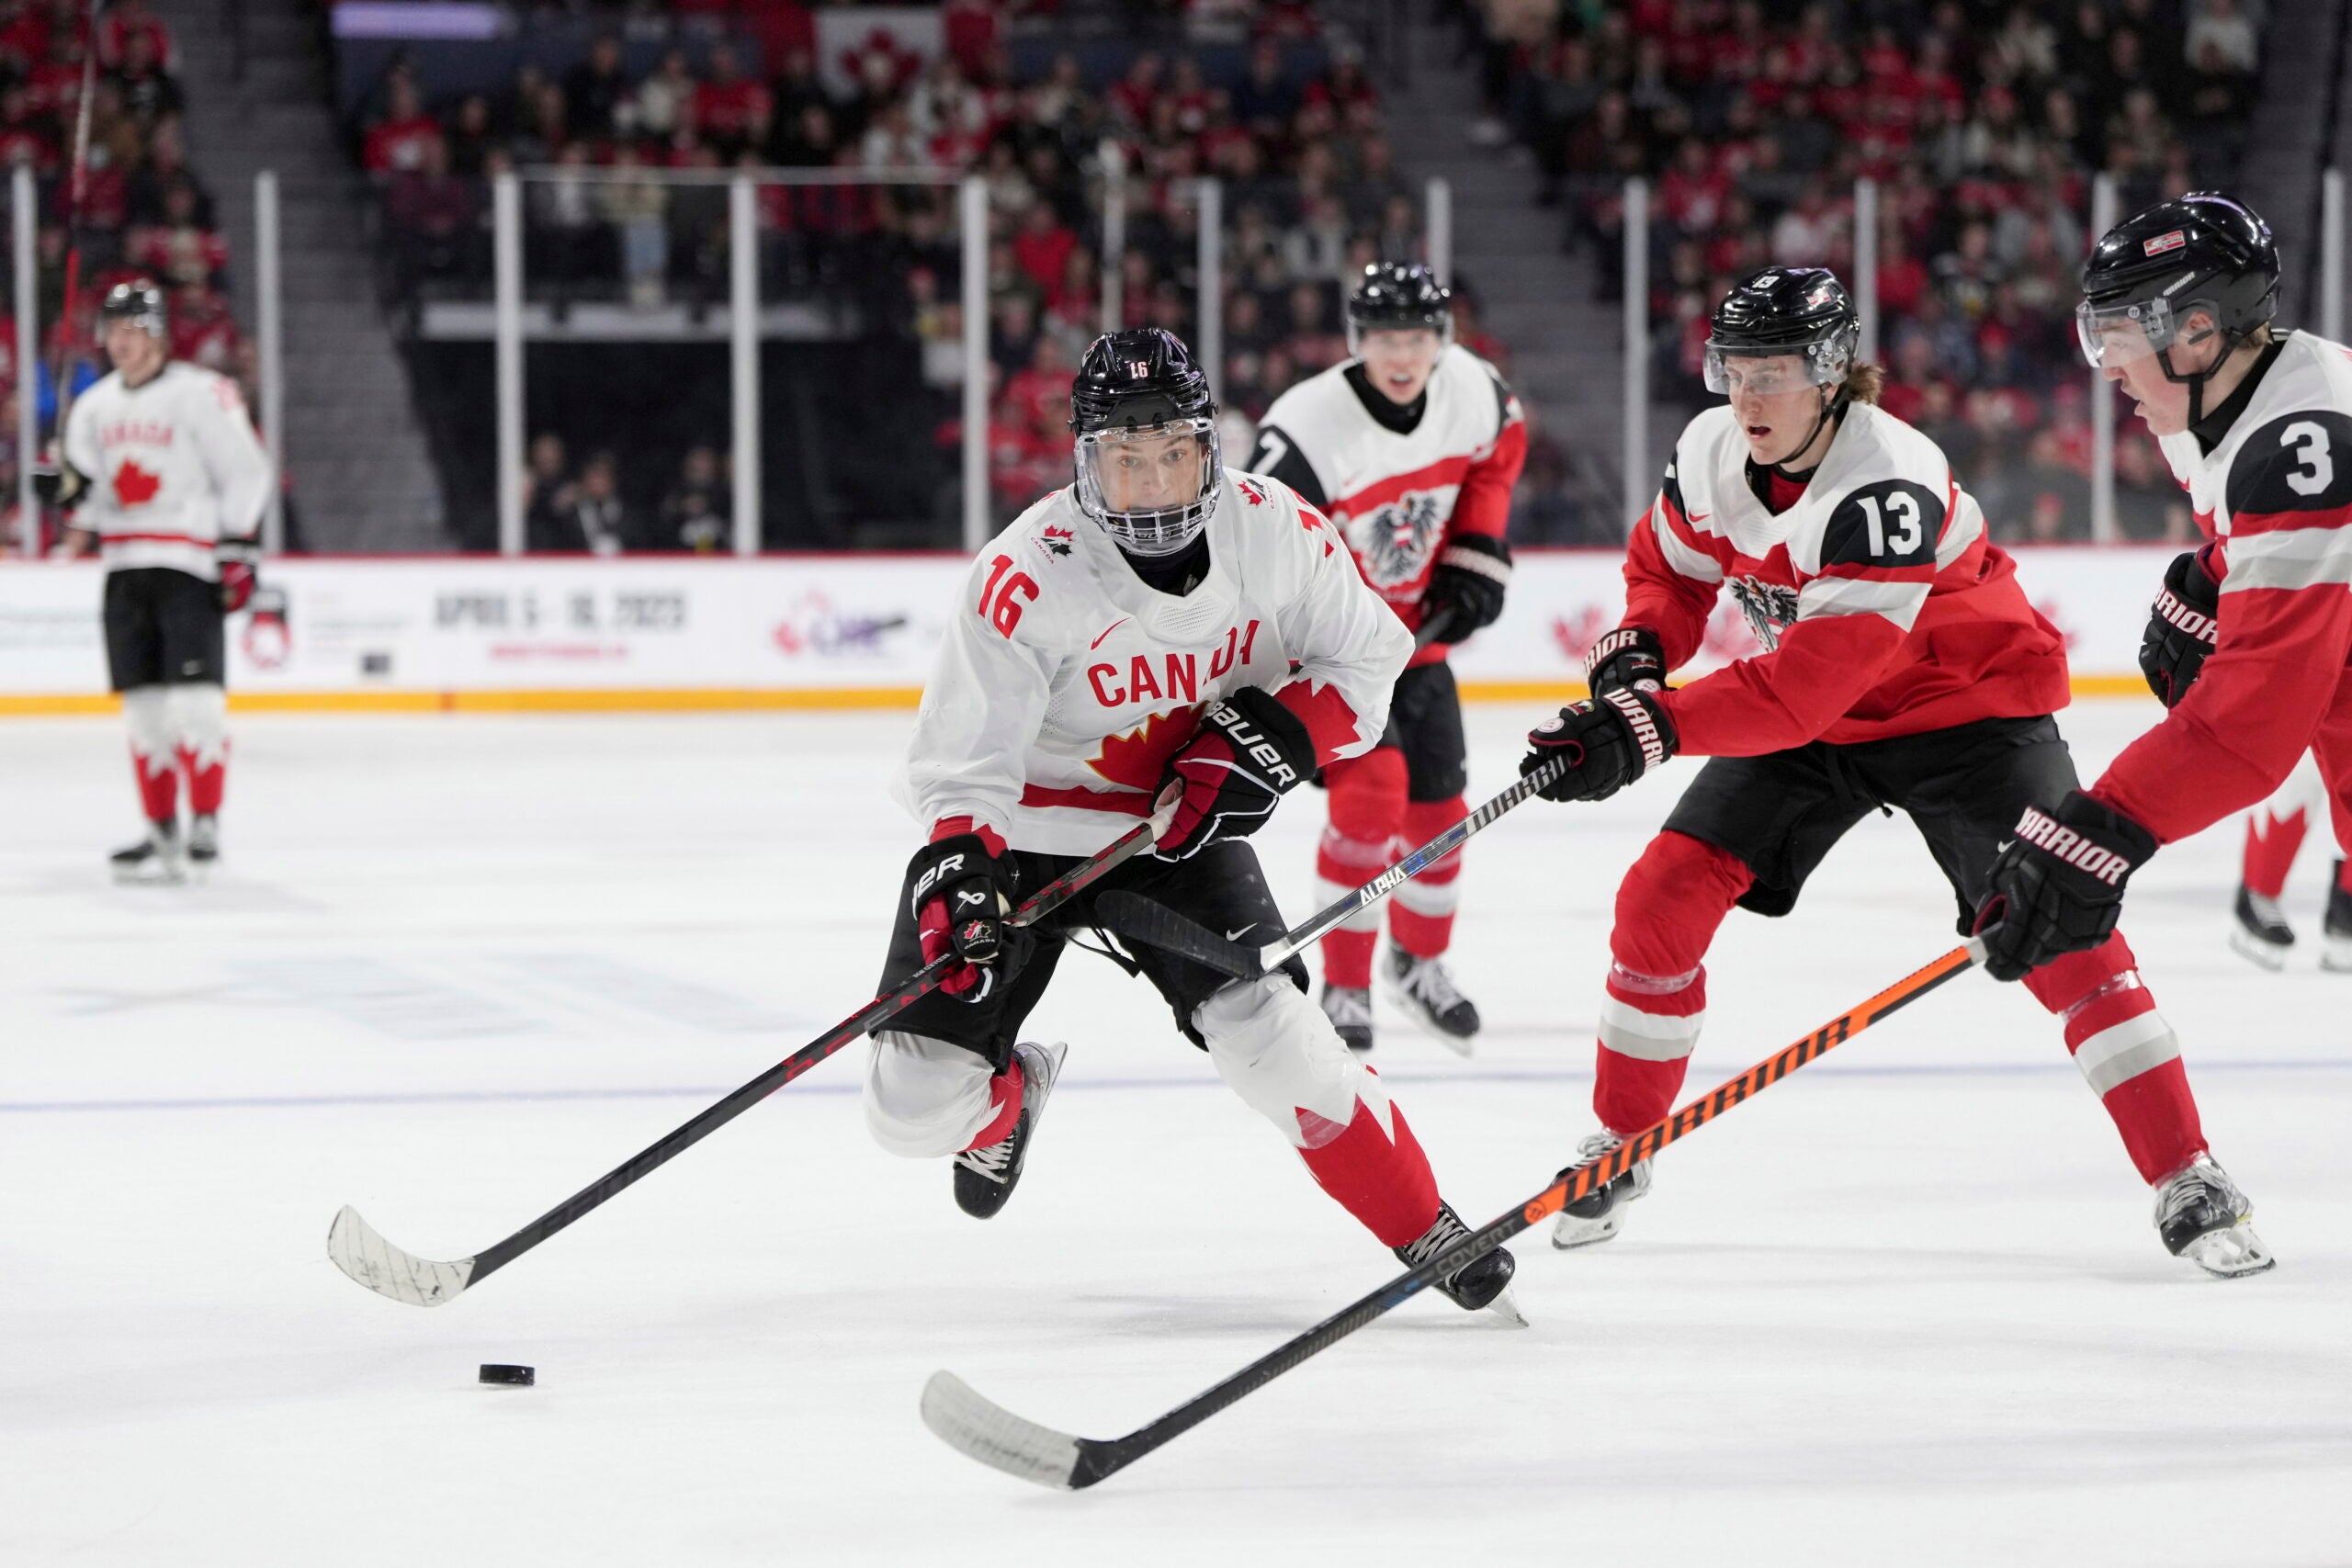 Canada's Connor Bedard, left, skates past Austria's Lukas Horl, right, and Luca Auer during the second period of a world junior hockey championships game in Halifax, Nova Scotia.